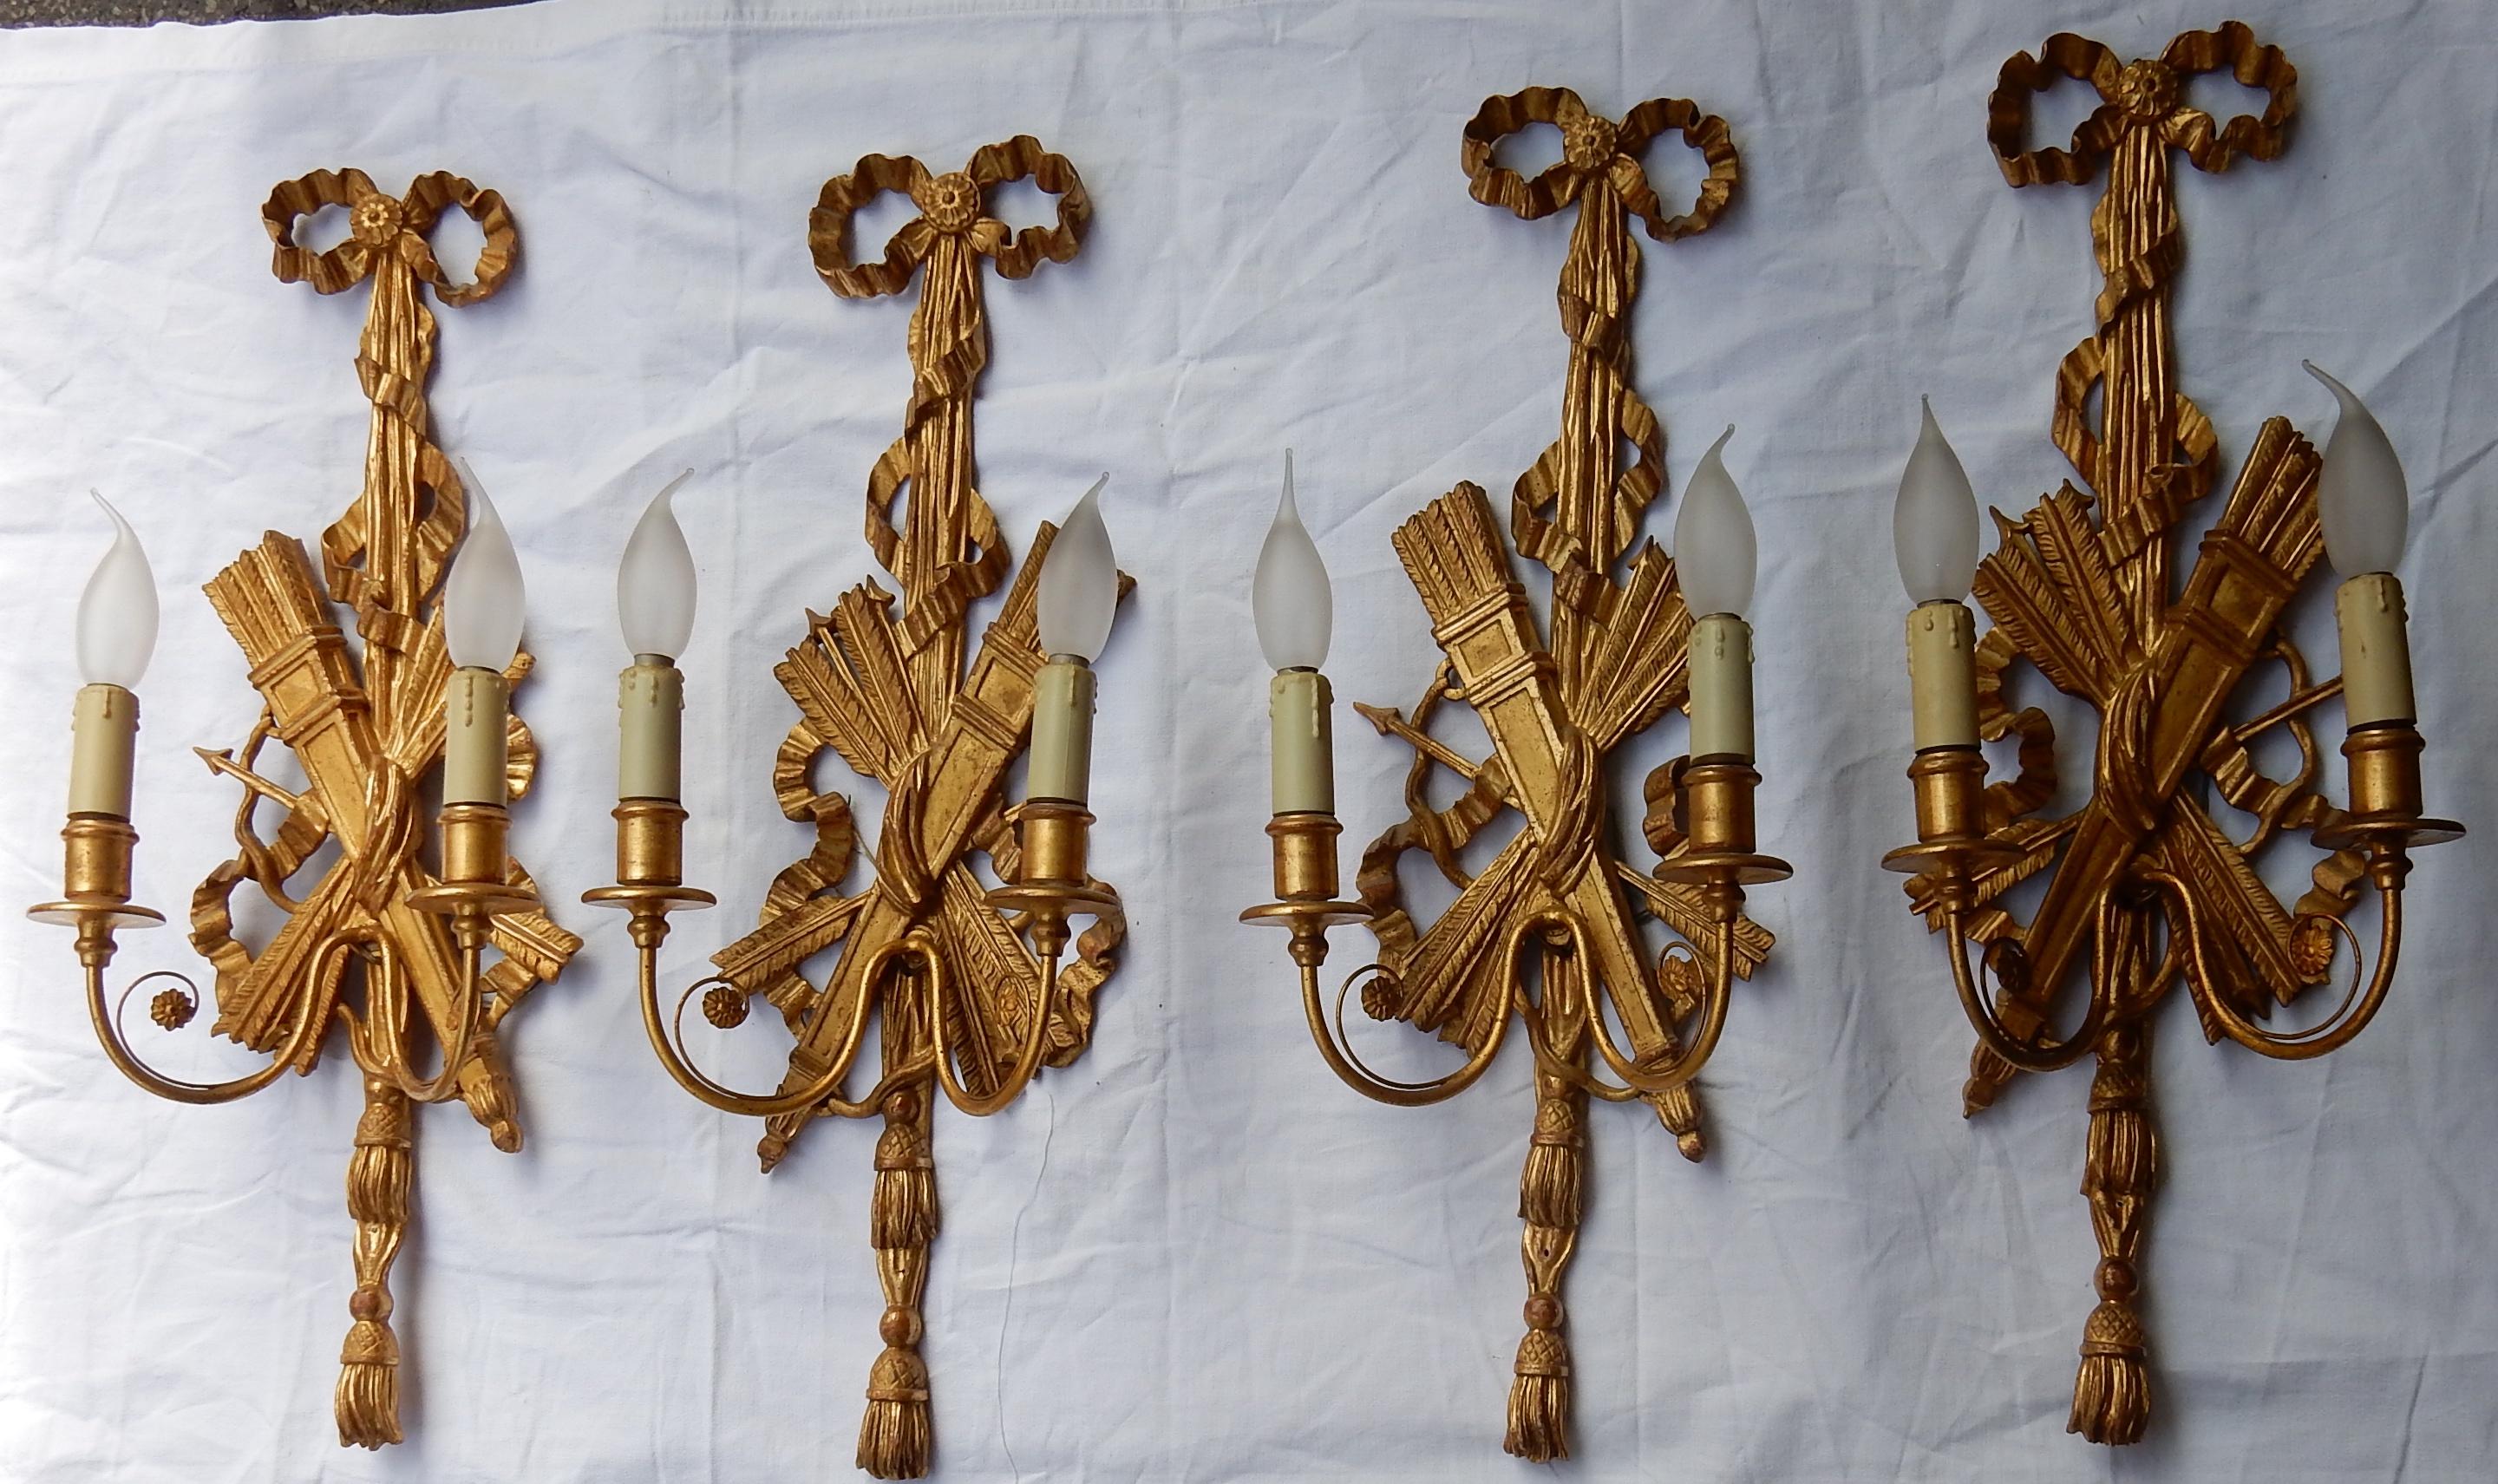 2 Pair of Sconces, Golden Wood and Golden Iron Attributes with Arrows, 1950-1970 For Sale 1